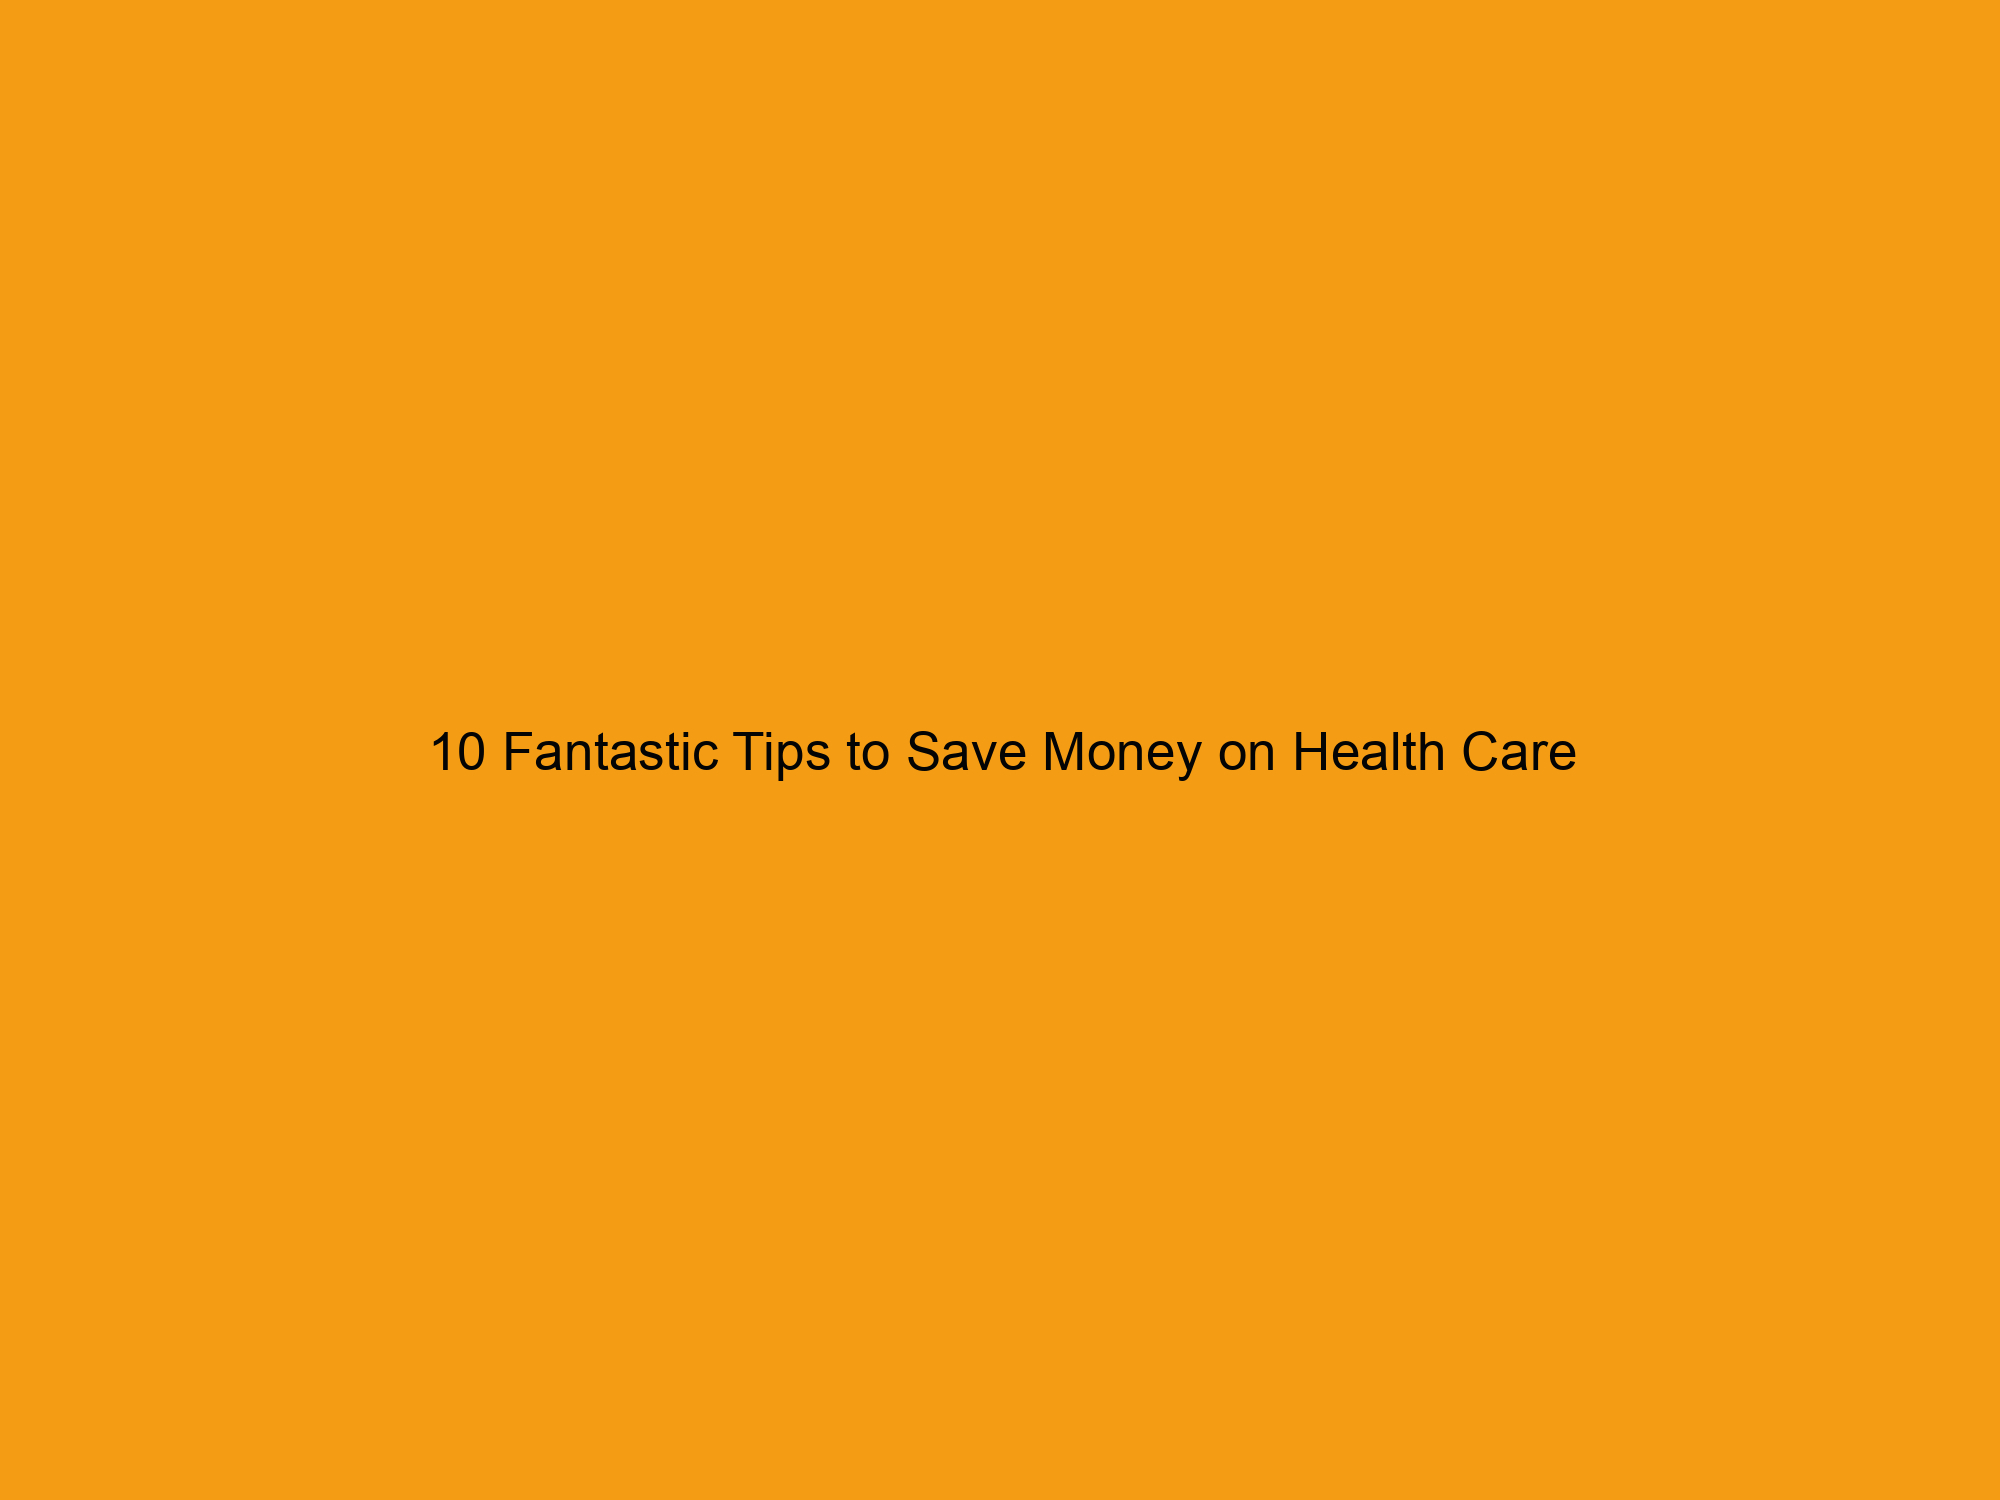 10 Fantastic Tips to Save Money on Health Care